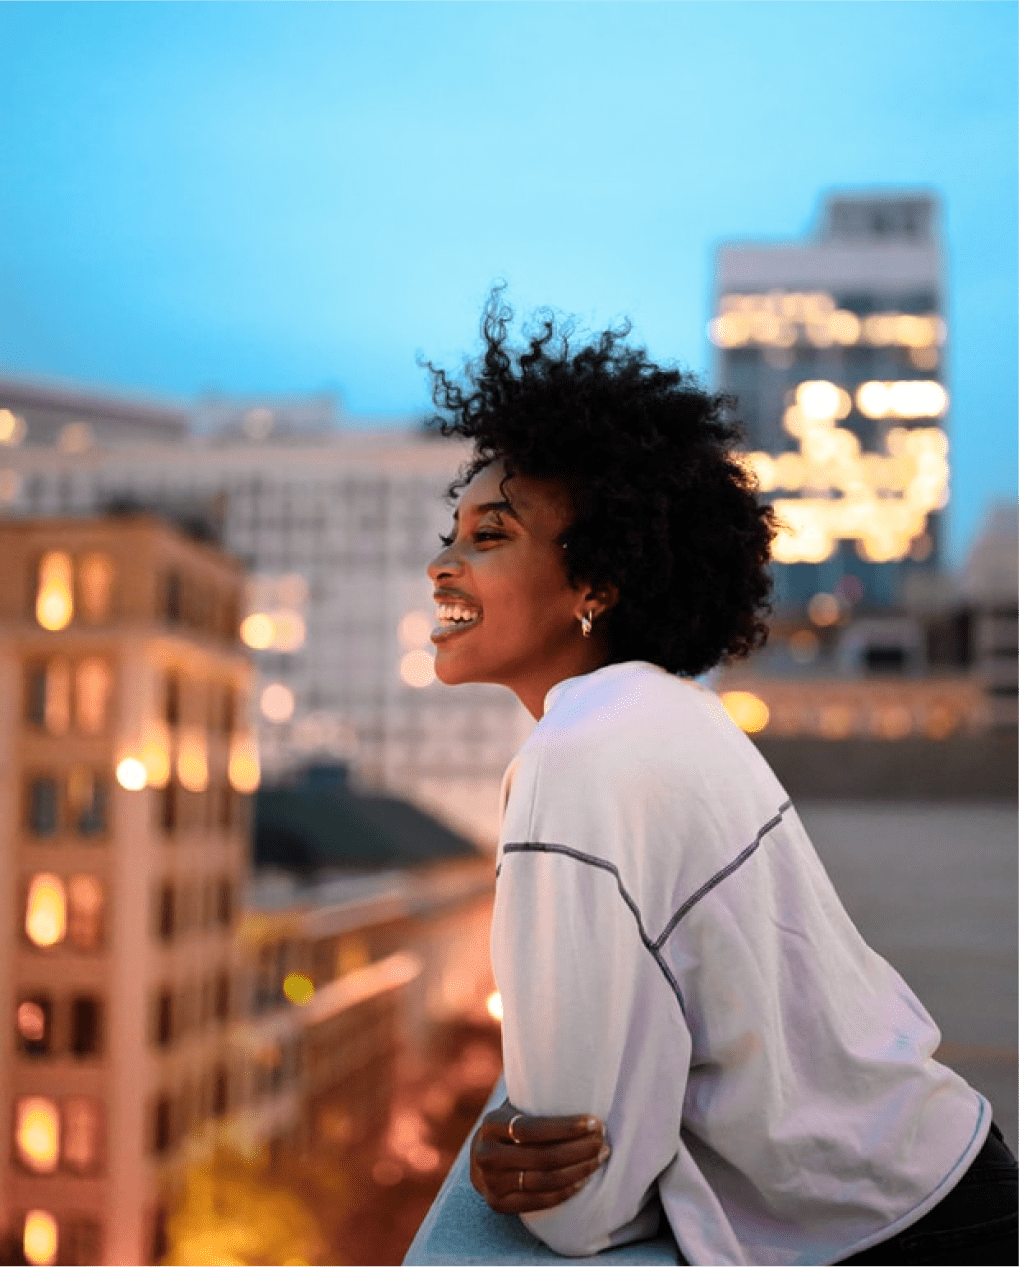 Smiling woman standing on a building rooftop in the evening